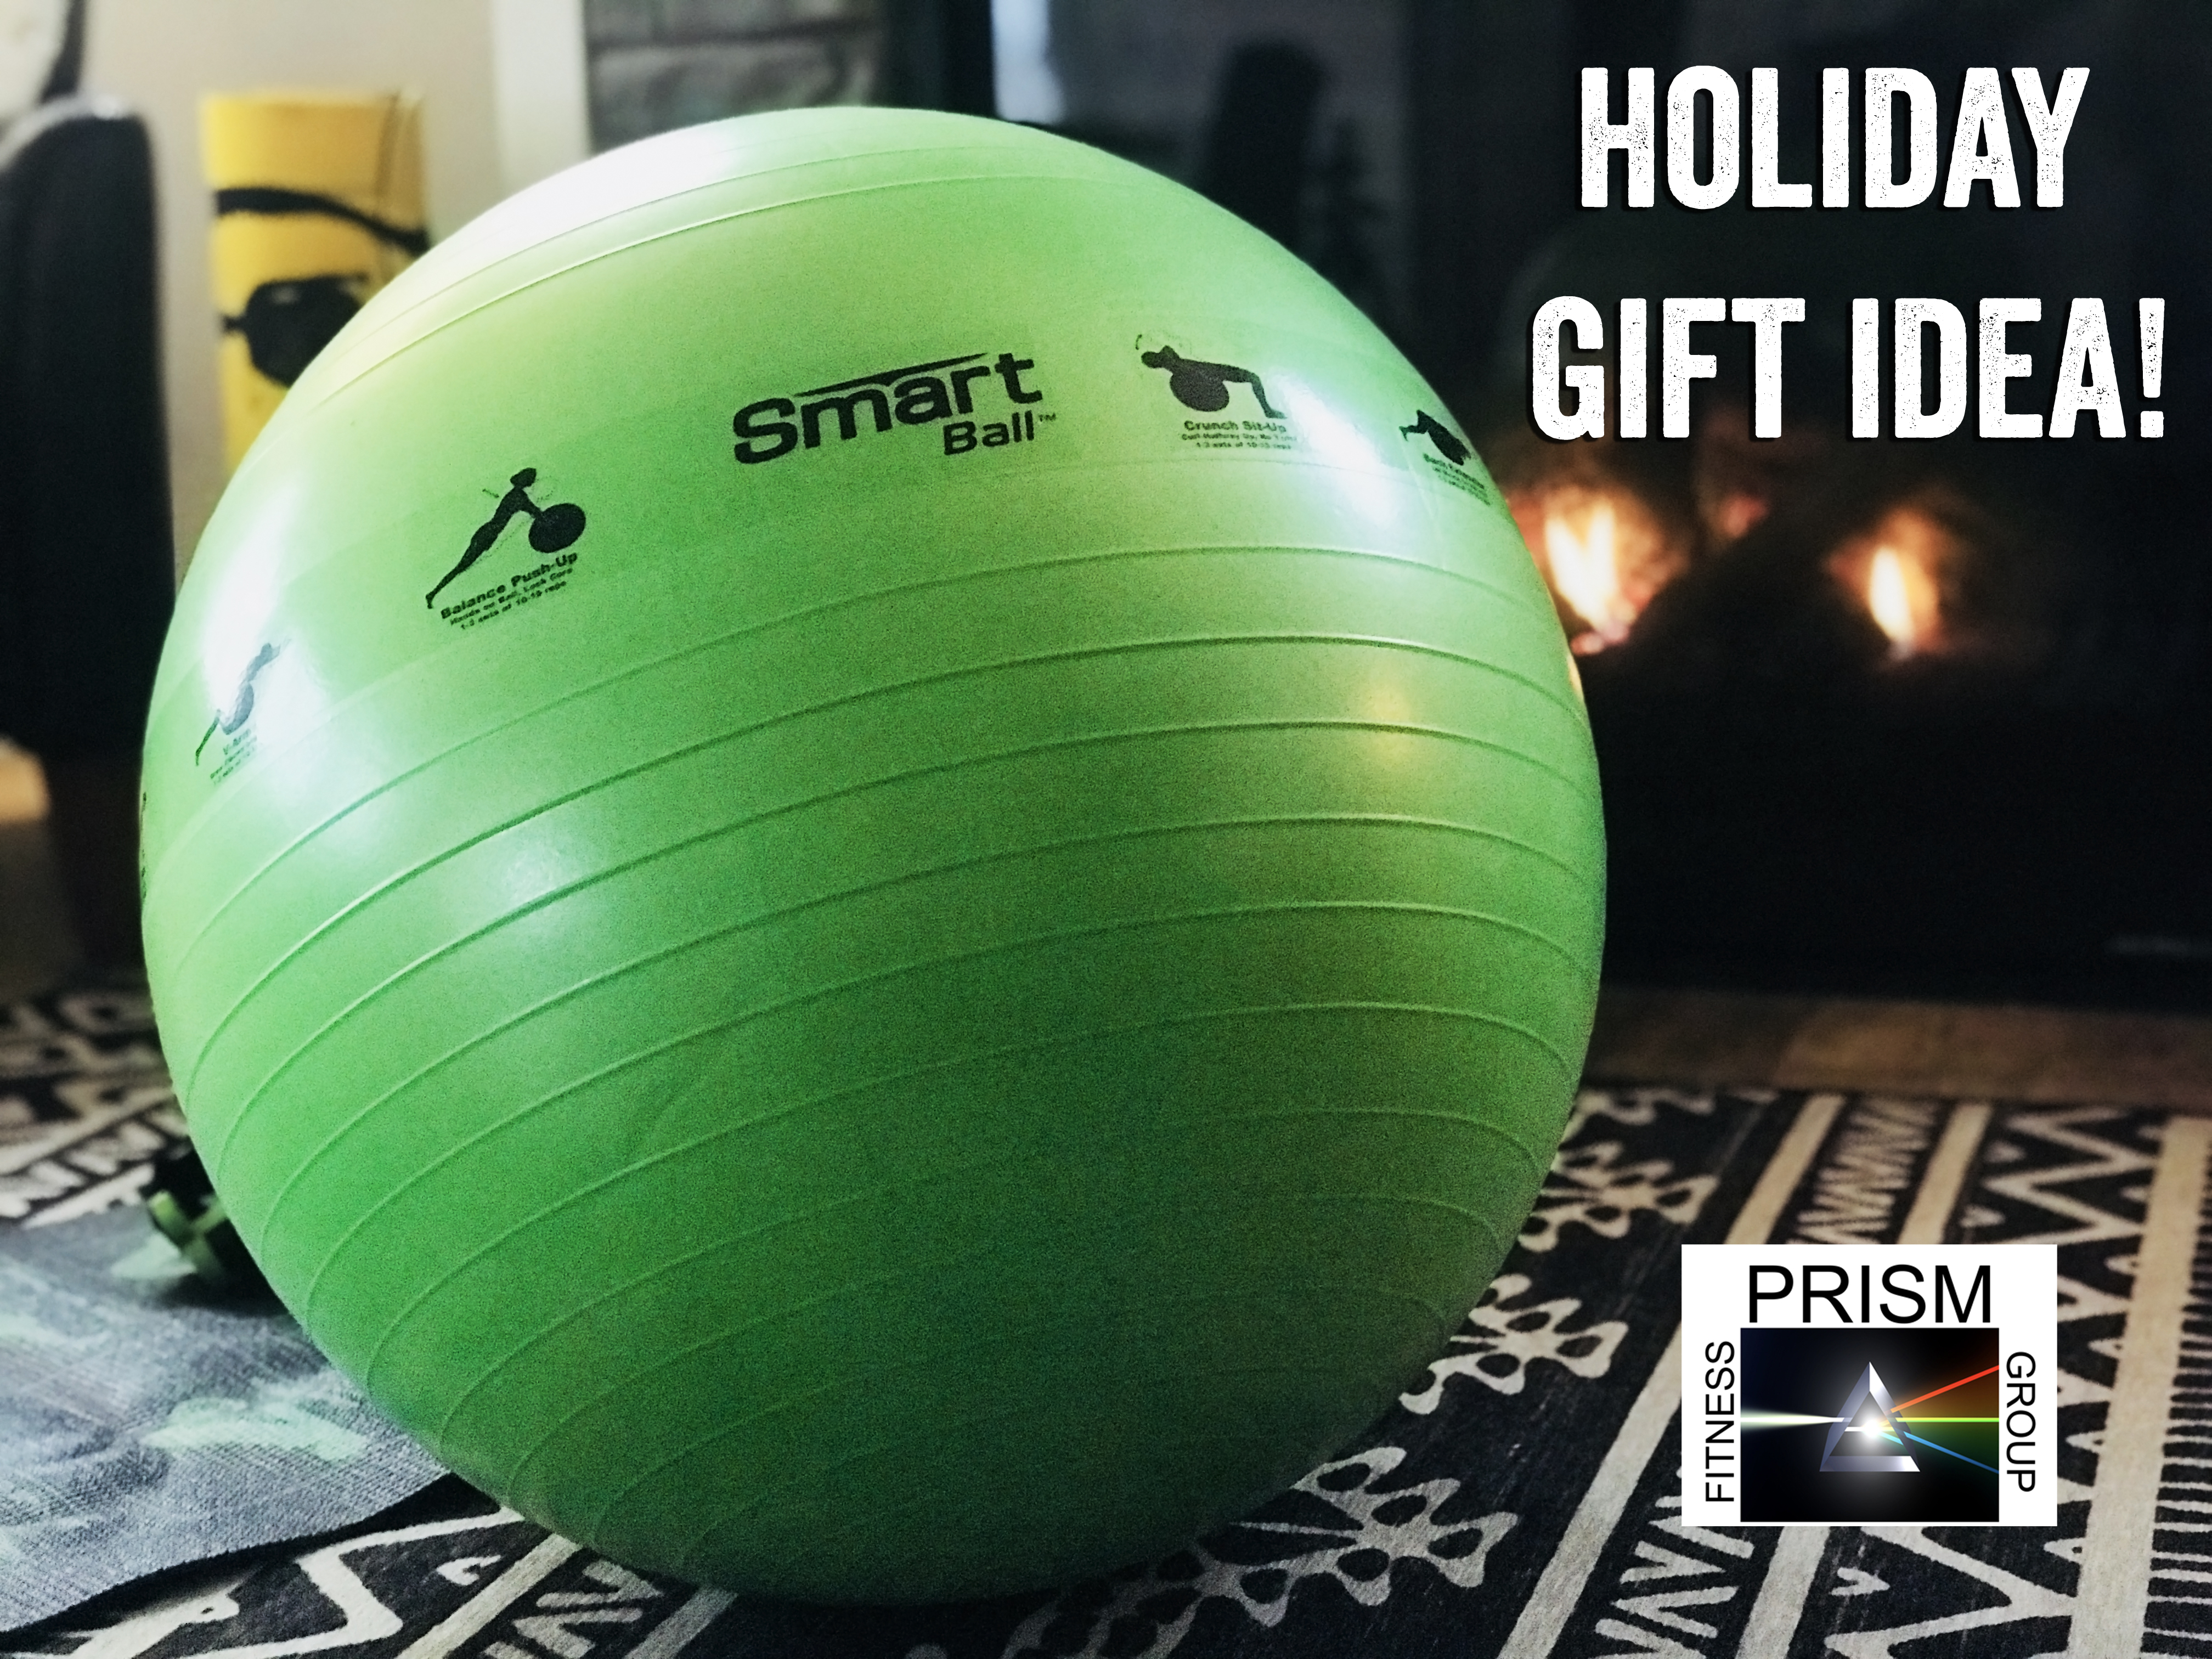 Smart Stability Ball - Holiday gift Idea